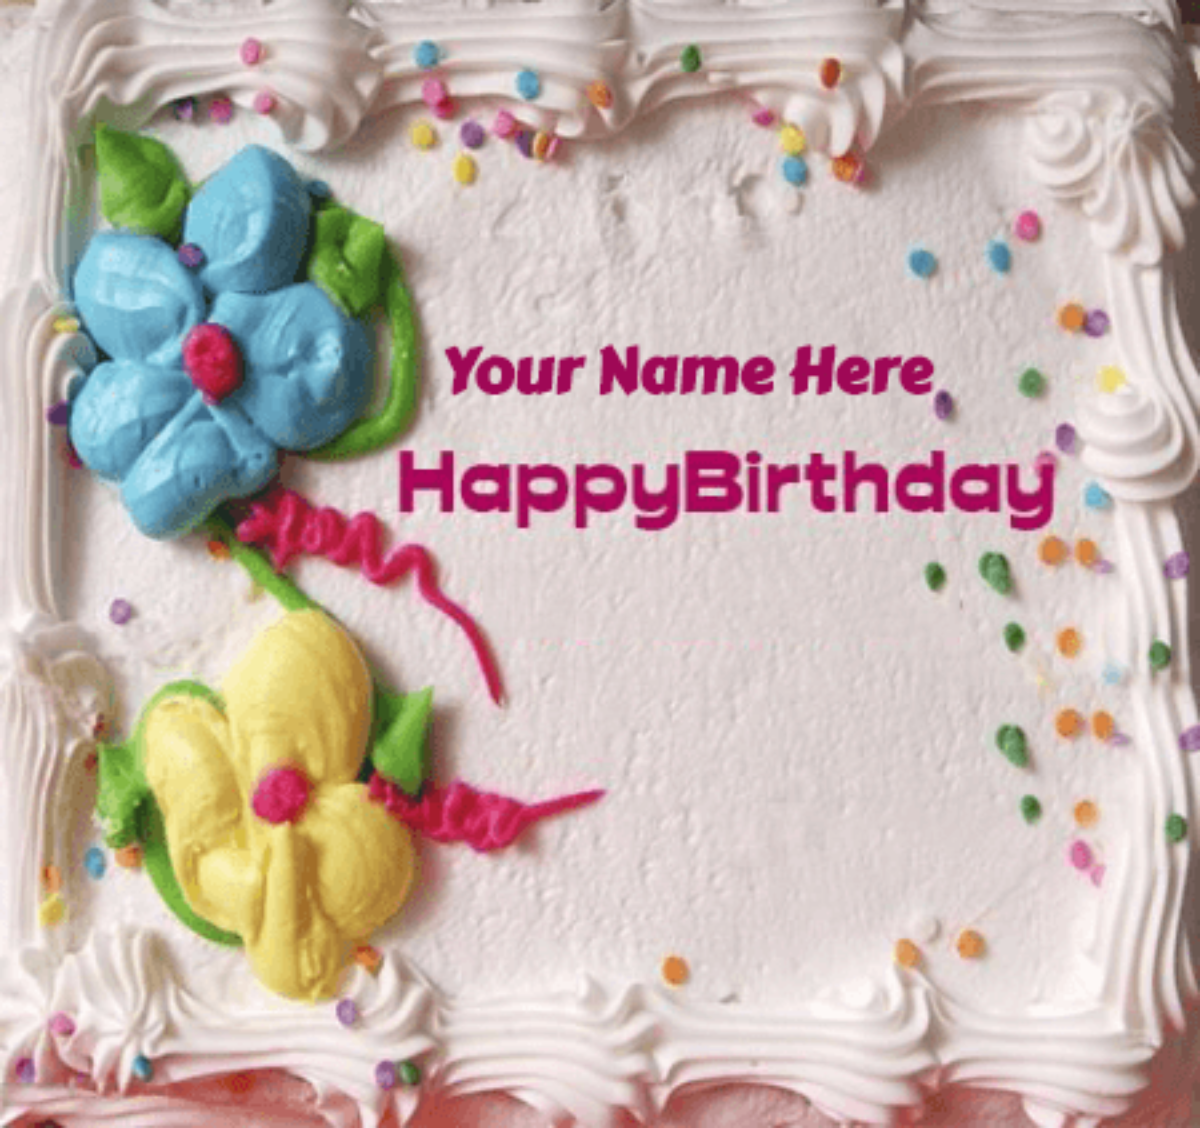 50 Best Belated Happy Birthday Wishes Images Free Download